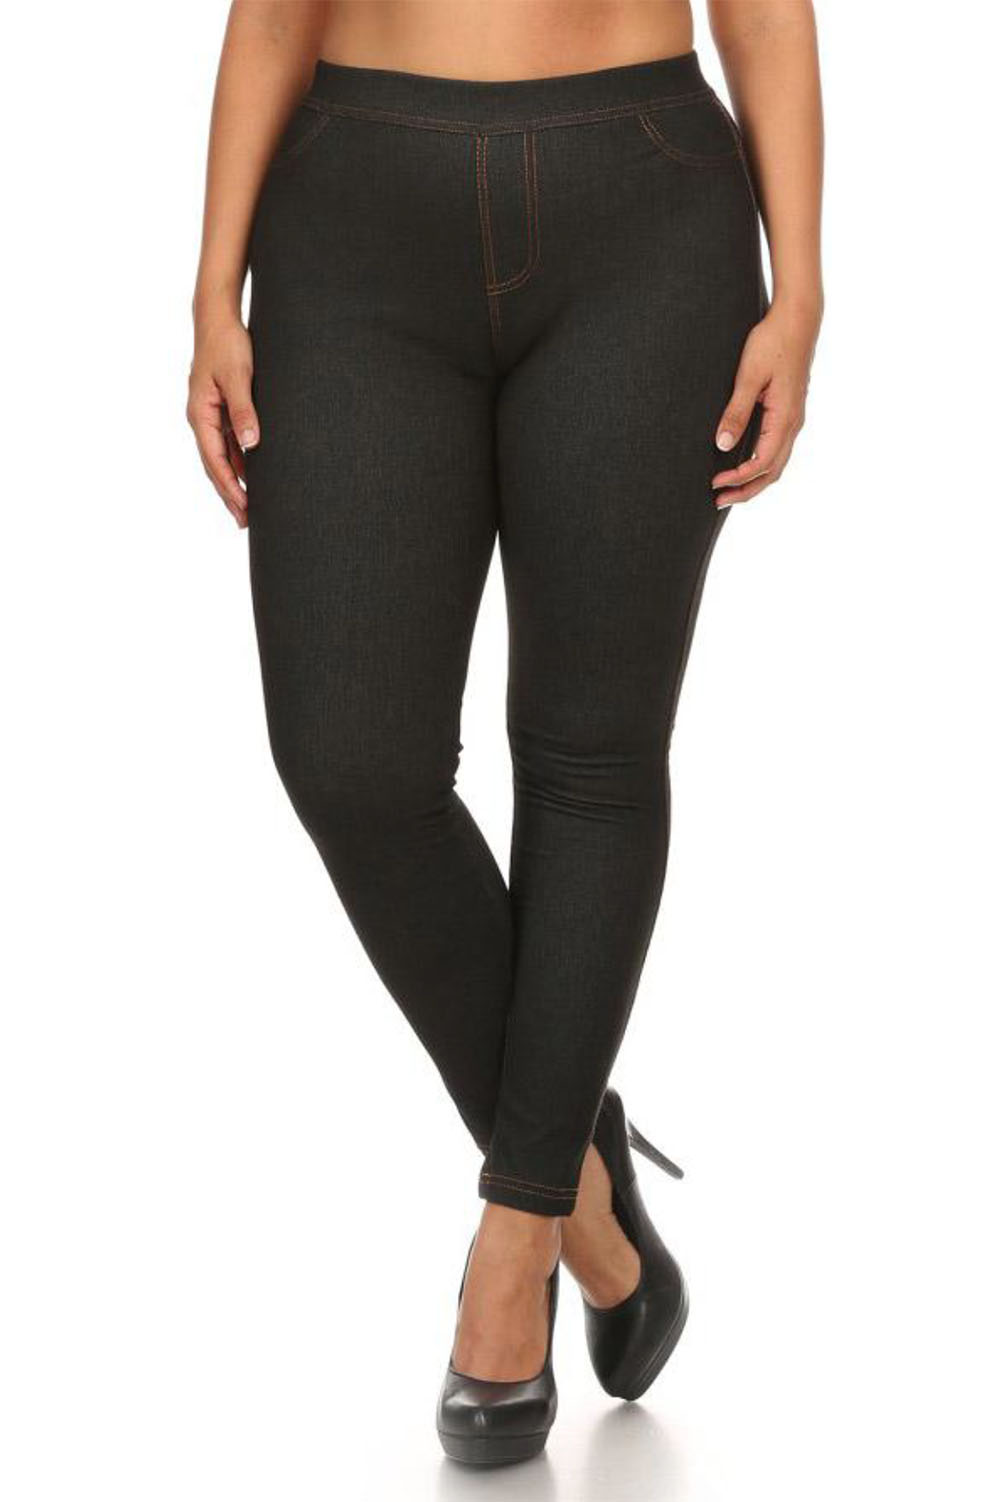 Ripped and Distressed Seamless Leggings – ICONOFLASH